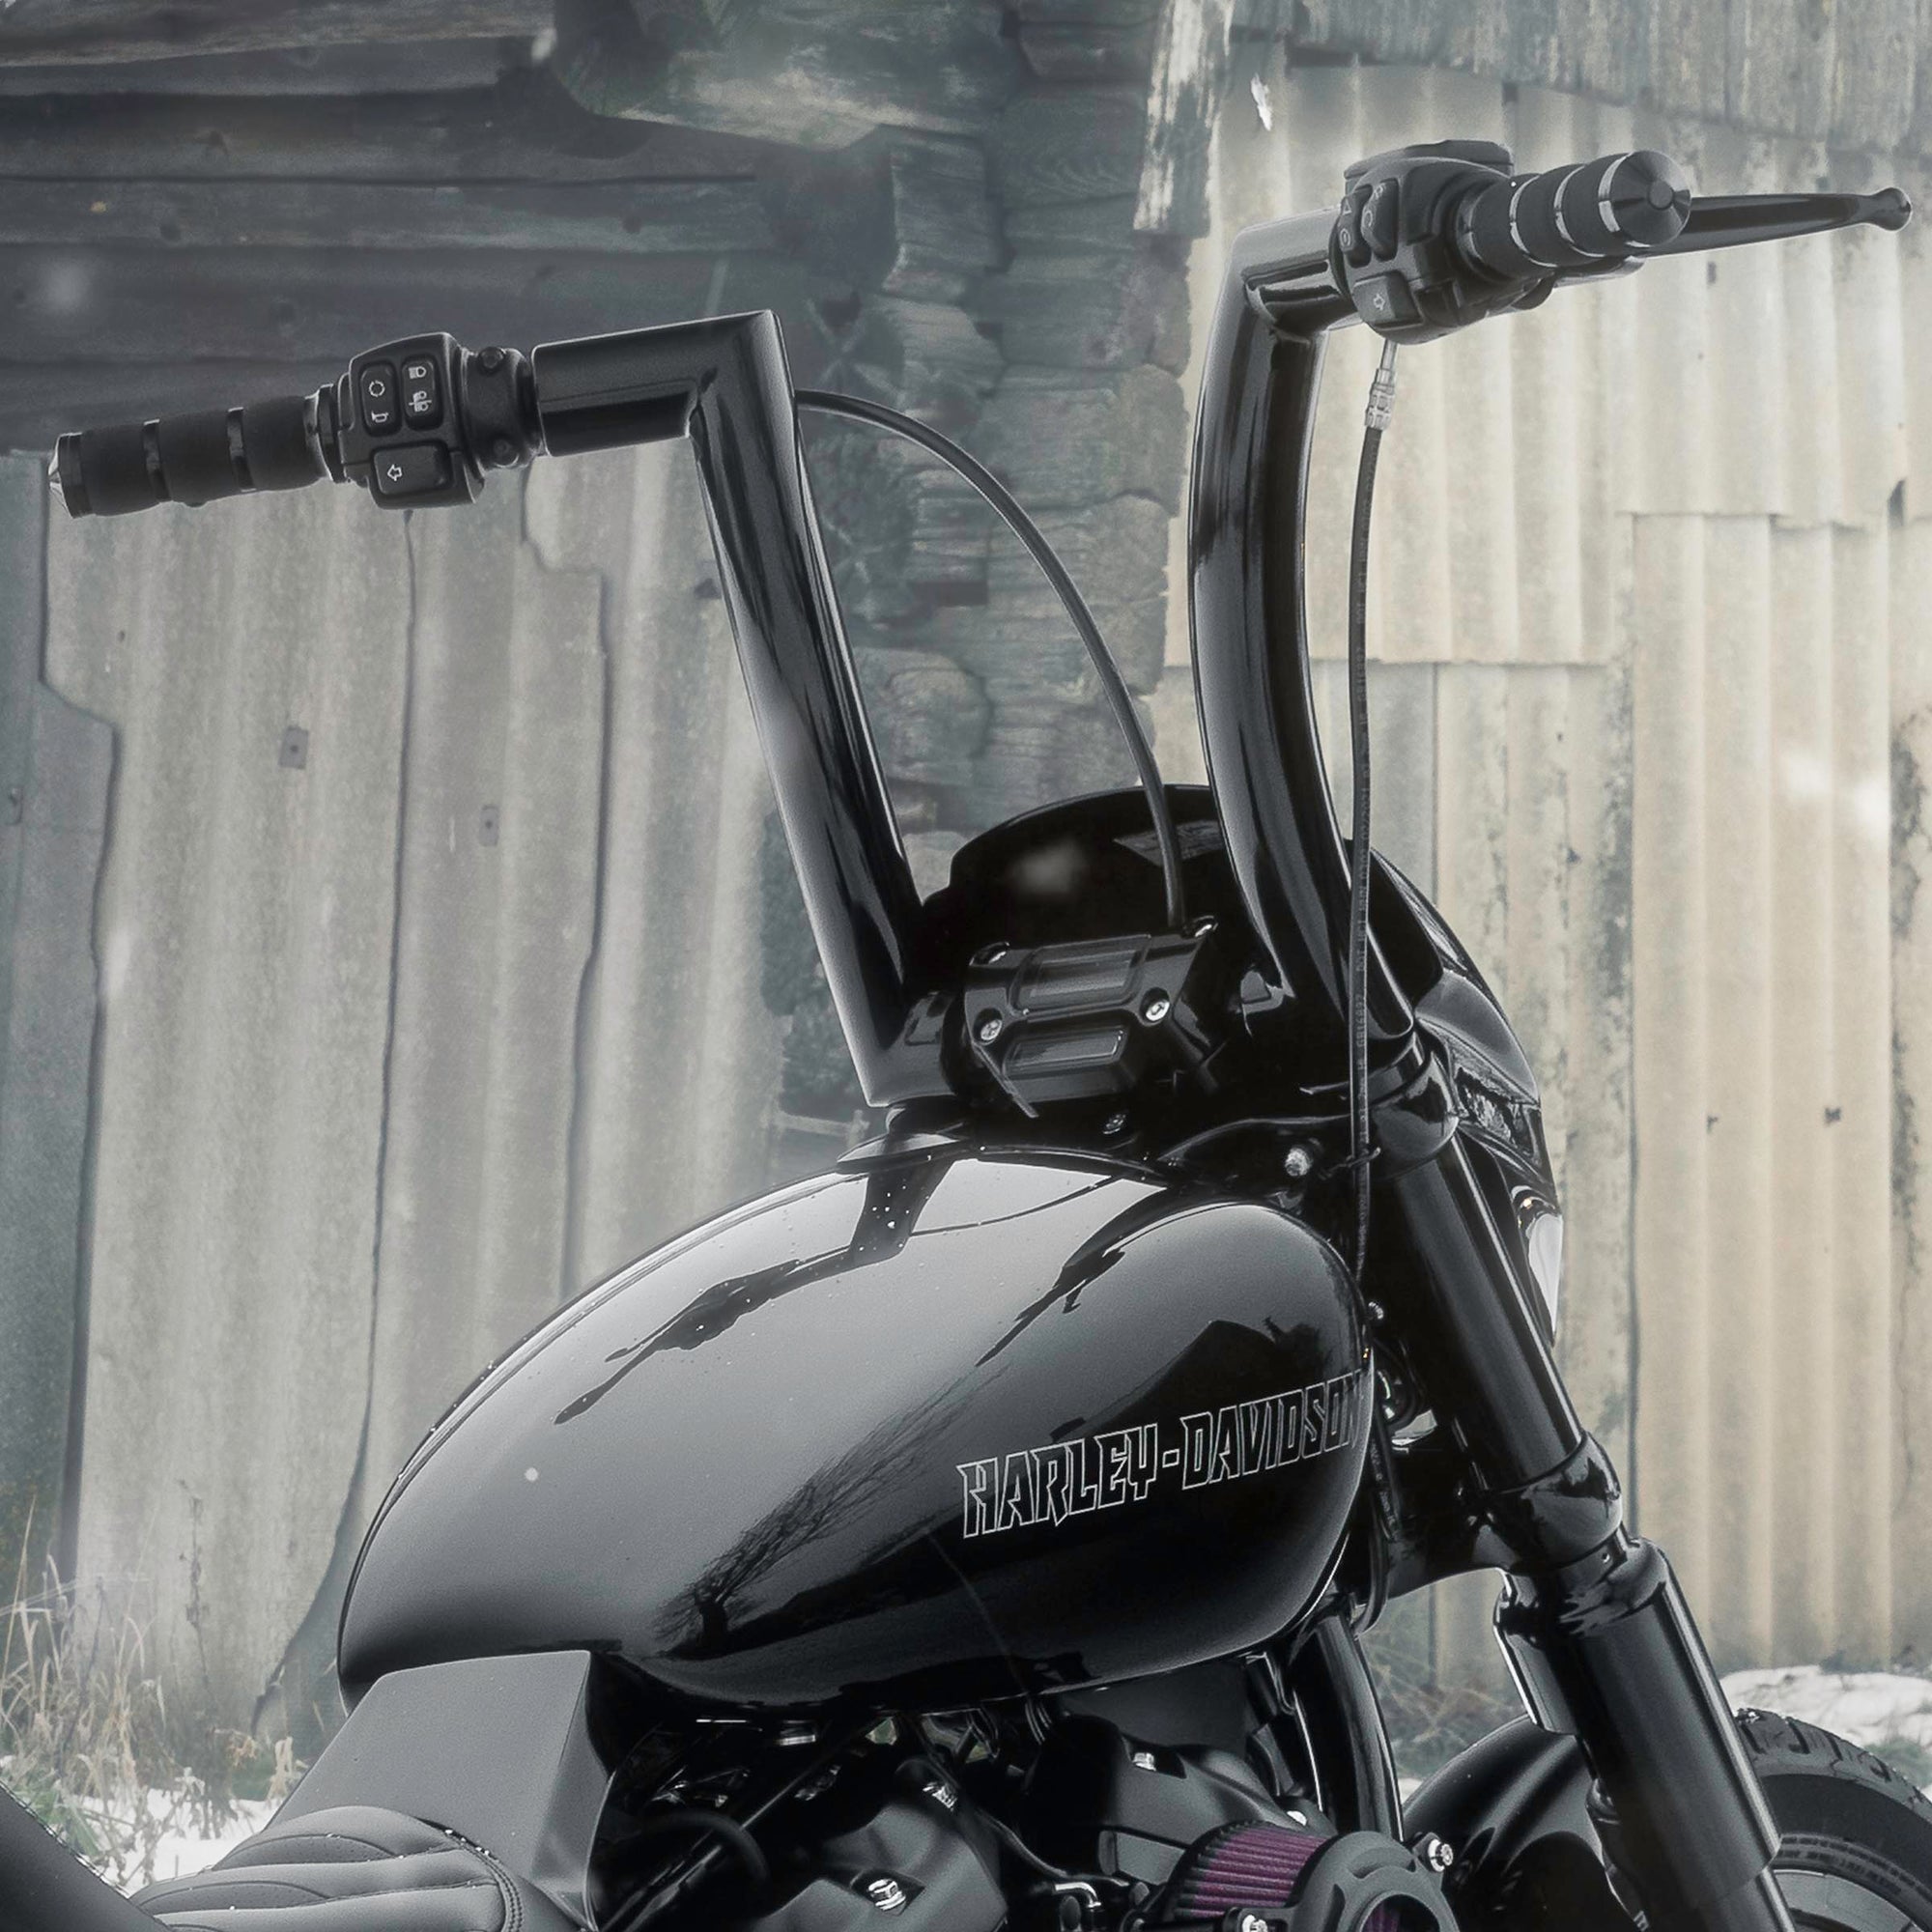 Zoomed Harley Davidson Softail motorcycle with Killer Custom parts outside on a snowy day in an abandoned environment